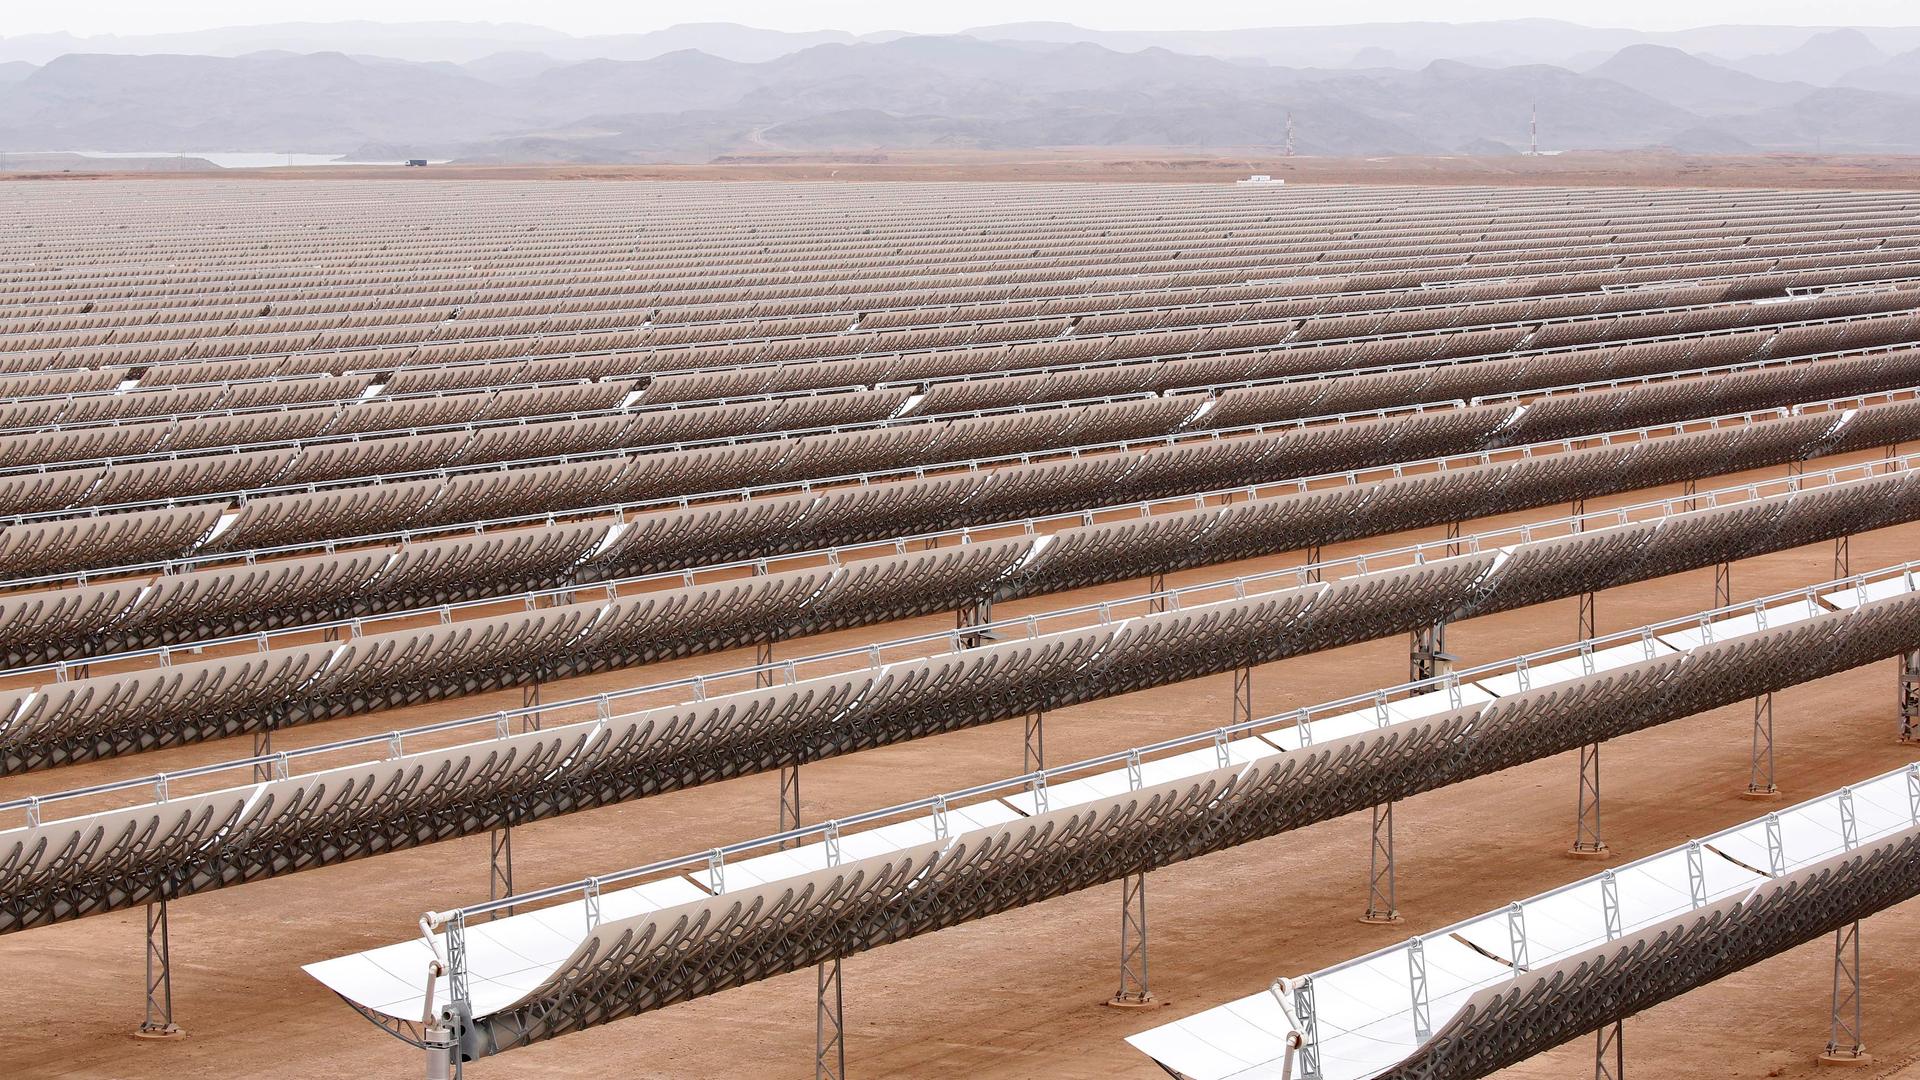 A vast array of curved mirrors at the Noor Concentrated Solar Power plant near Ouarzazate, Morocco. The massive facility is part of an agressive effort to develop renewable power in Morocco.